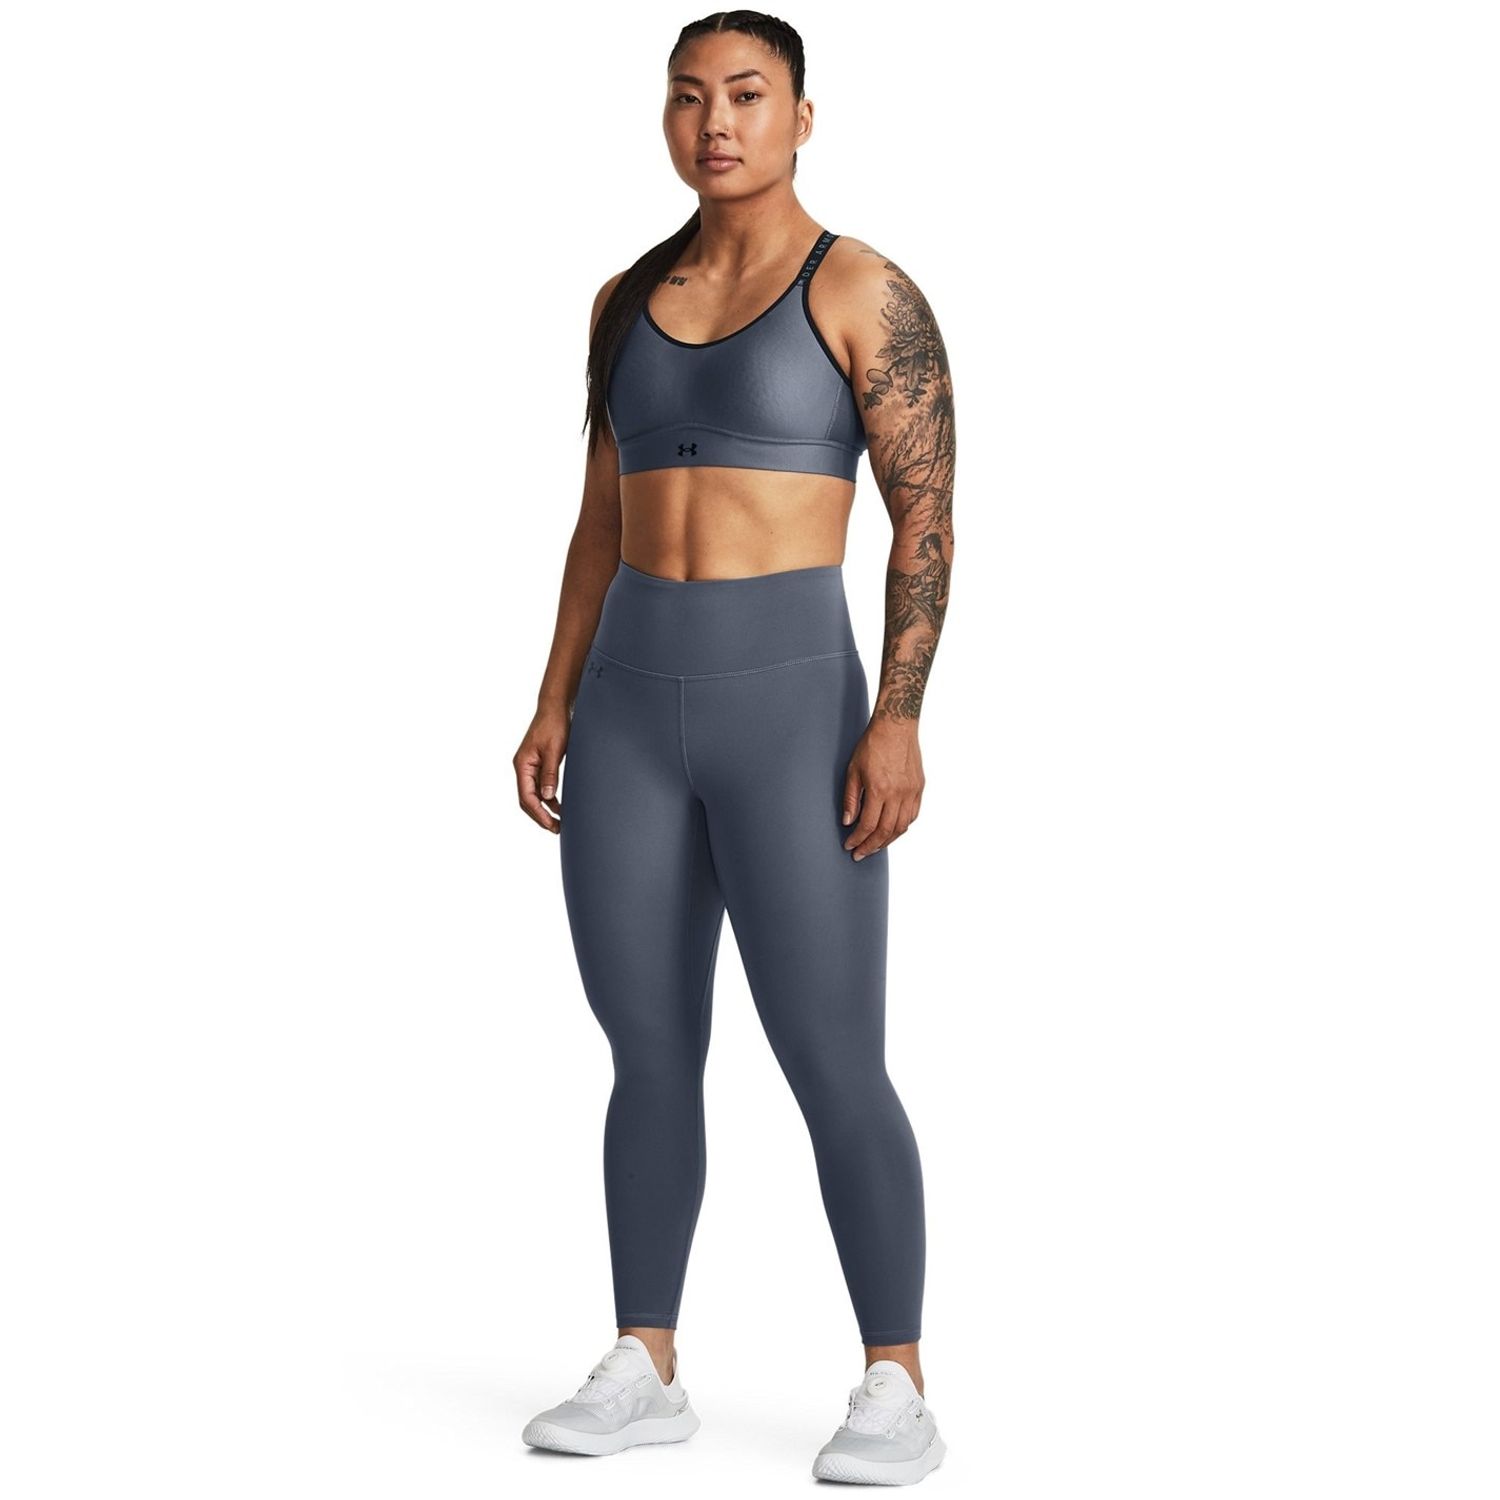 Under Armour Motion - Women's Training Pants Running Tights